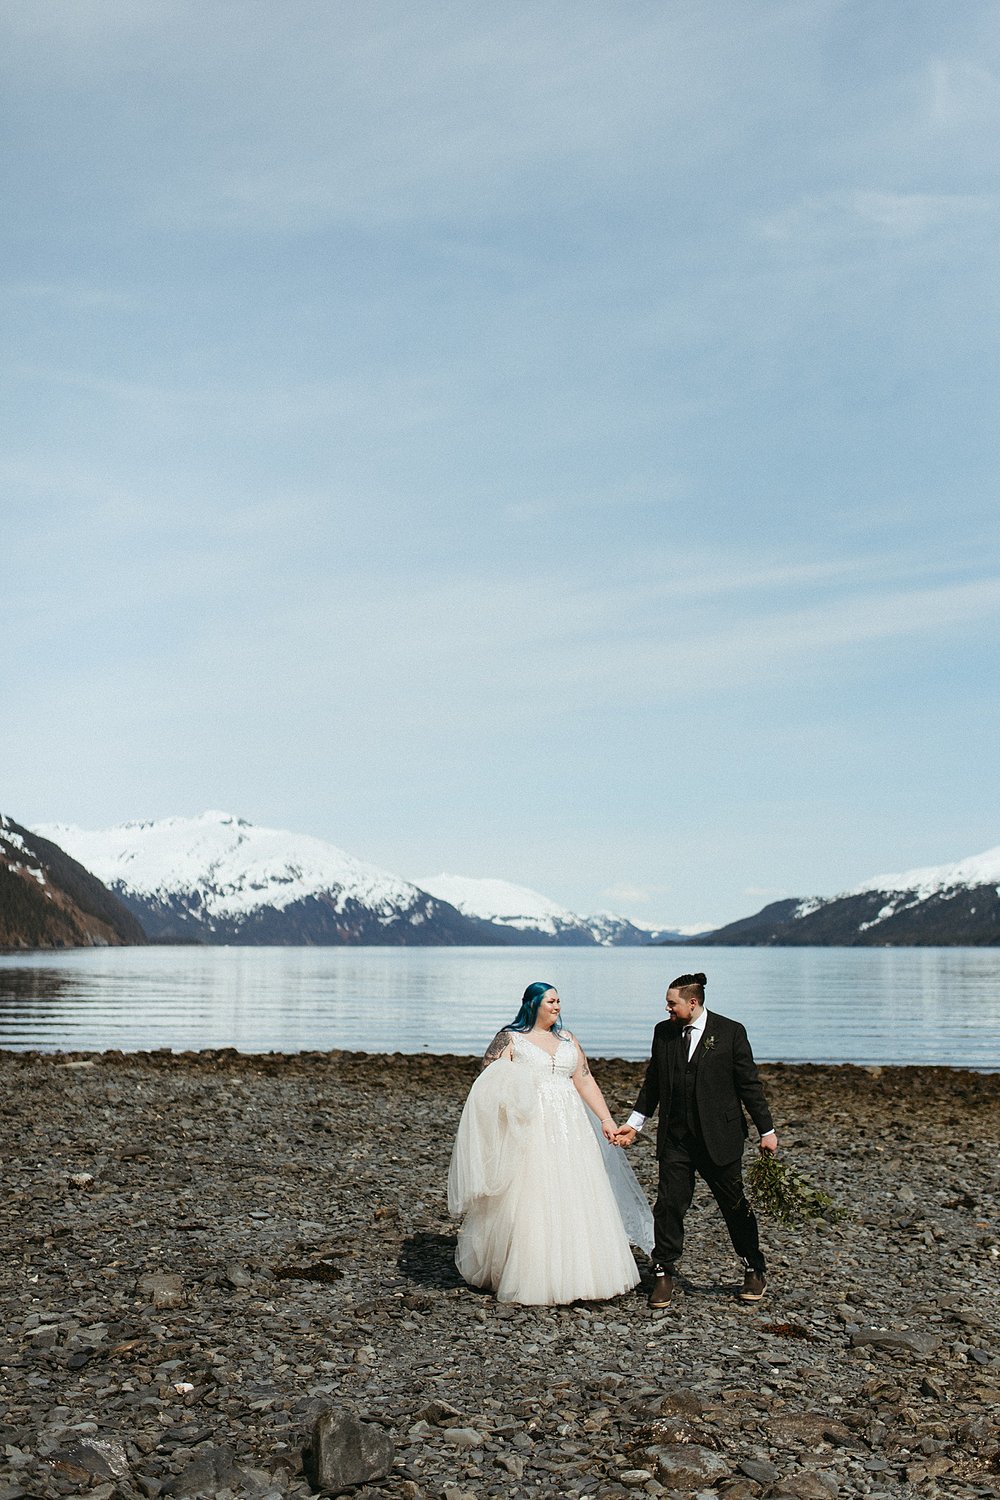  Bride with blue hair and groom walking next to mountain lake by Rachel Struve Photography 